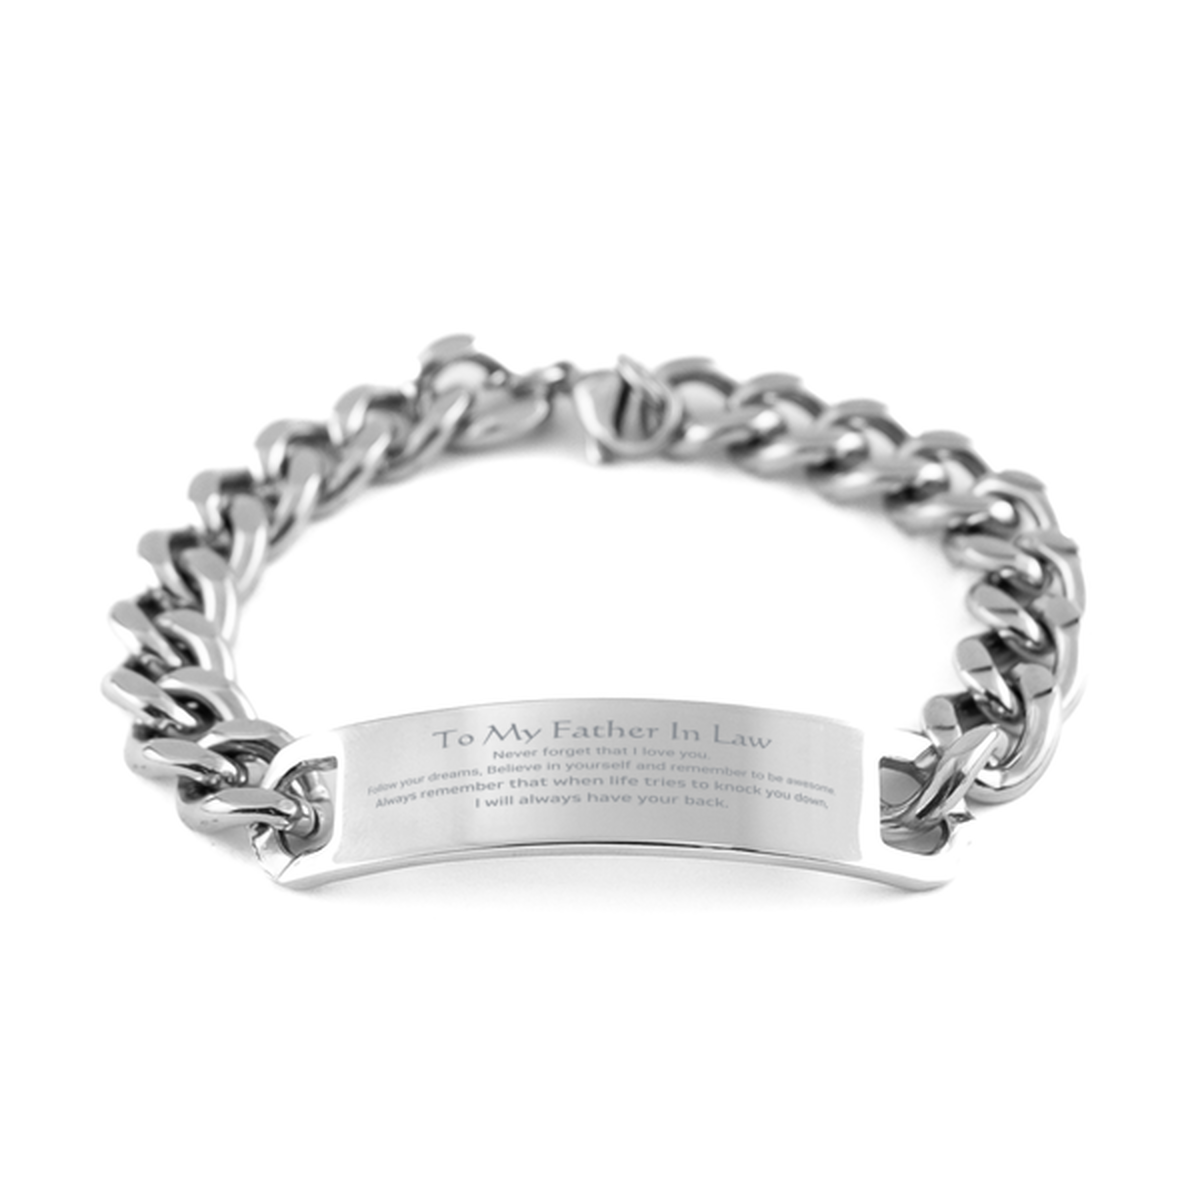 Inspirational Gifts for Father In Law, Follow your dreams, Believe in yourself, Father In Law Cuban Chain Stainless Steel Bracelet, Birthday Christmas Unique Gifts For Father In Law